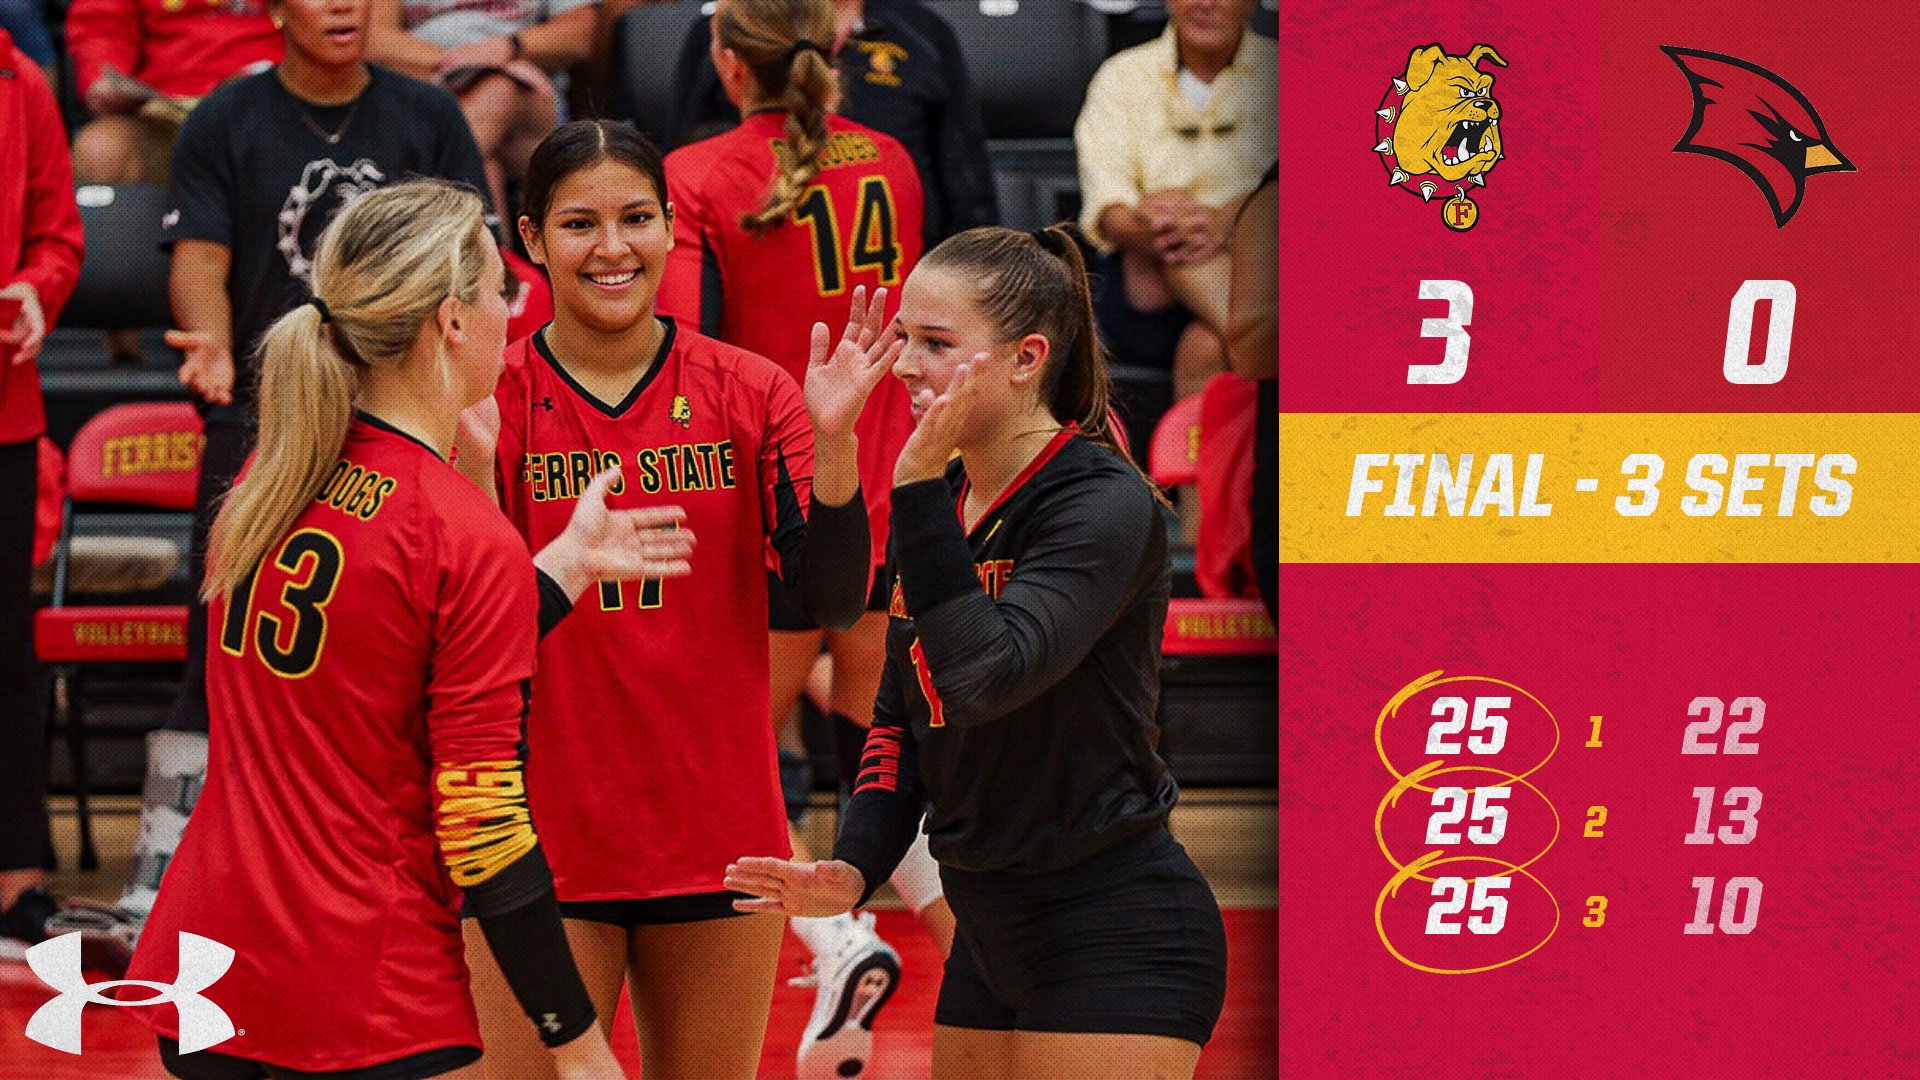 #22 Ferris State Stays Unbeaten In GLIAC Play With Dominating Road Sweep